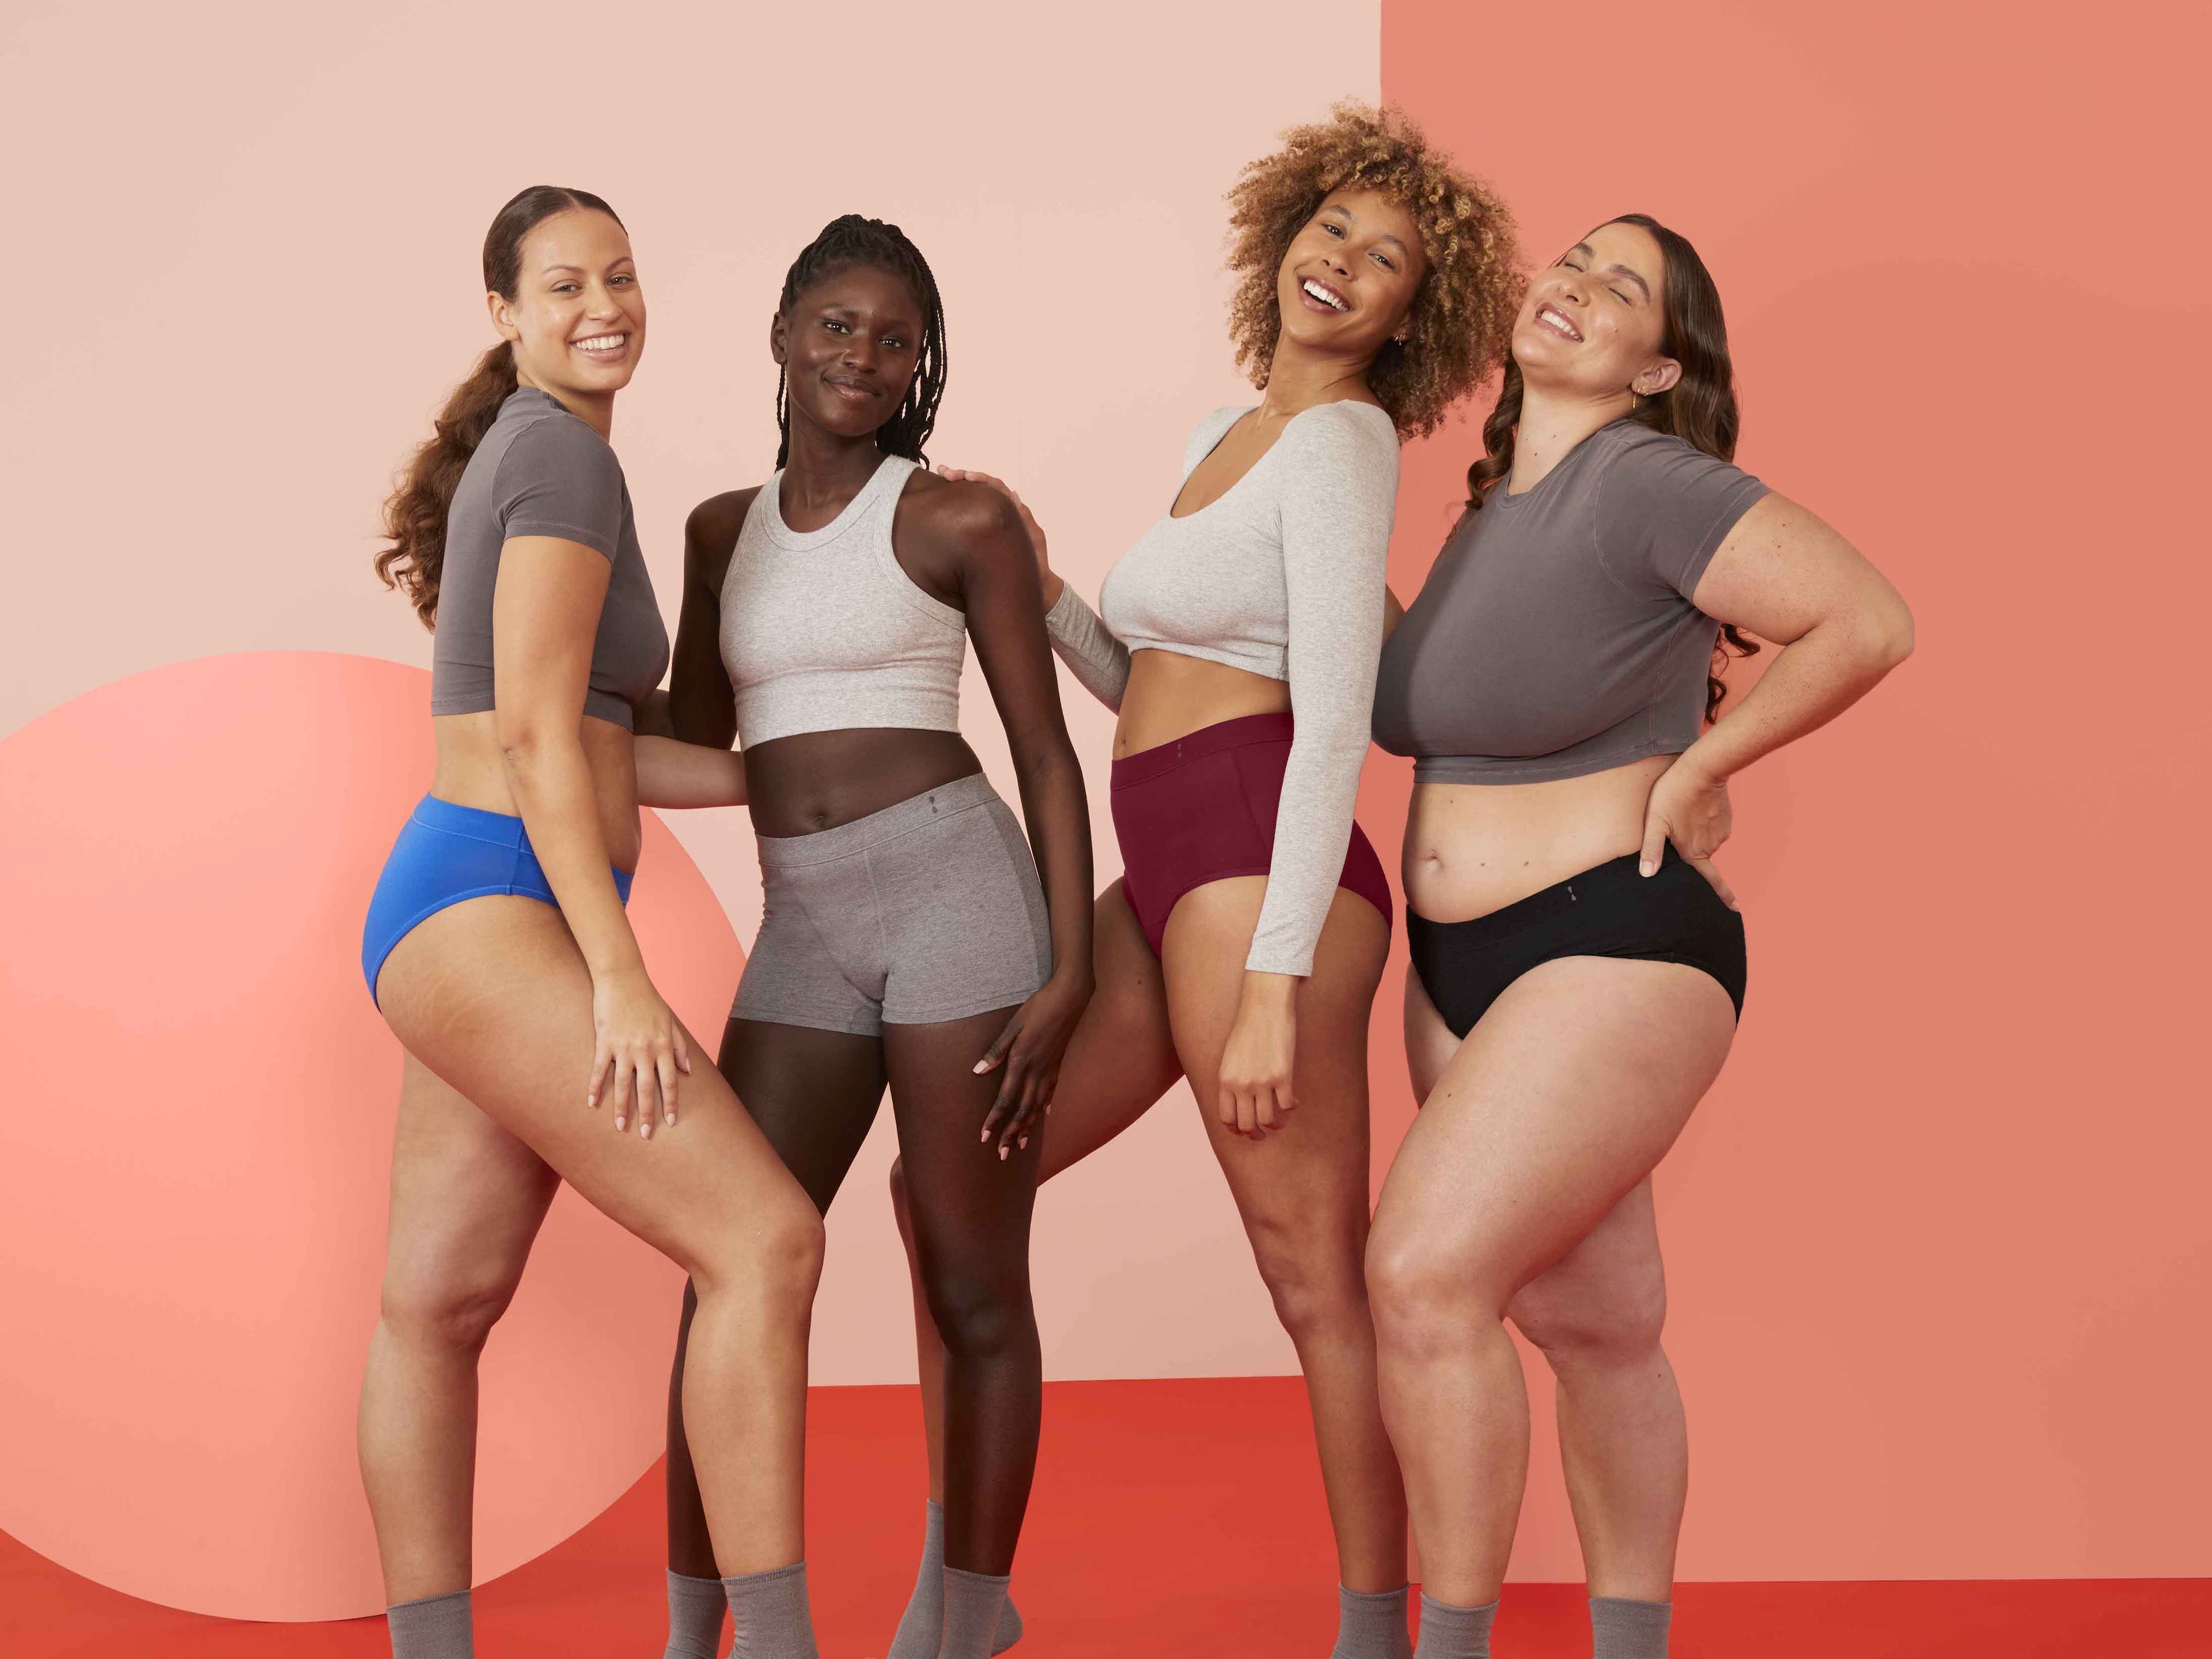 An image of 4 women wearing different Thinx for All styles. The styles are Cotton Bikini, Cotton Boyshort, Cotton Hi-Waist, and Cotton Brief.